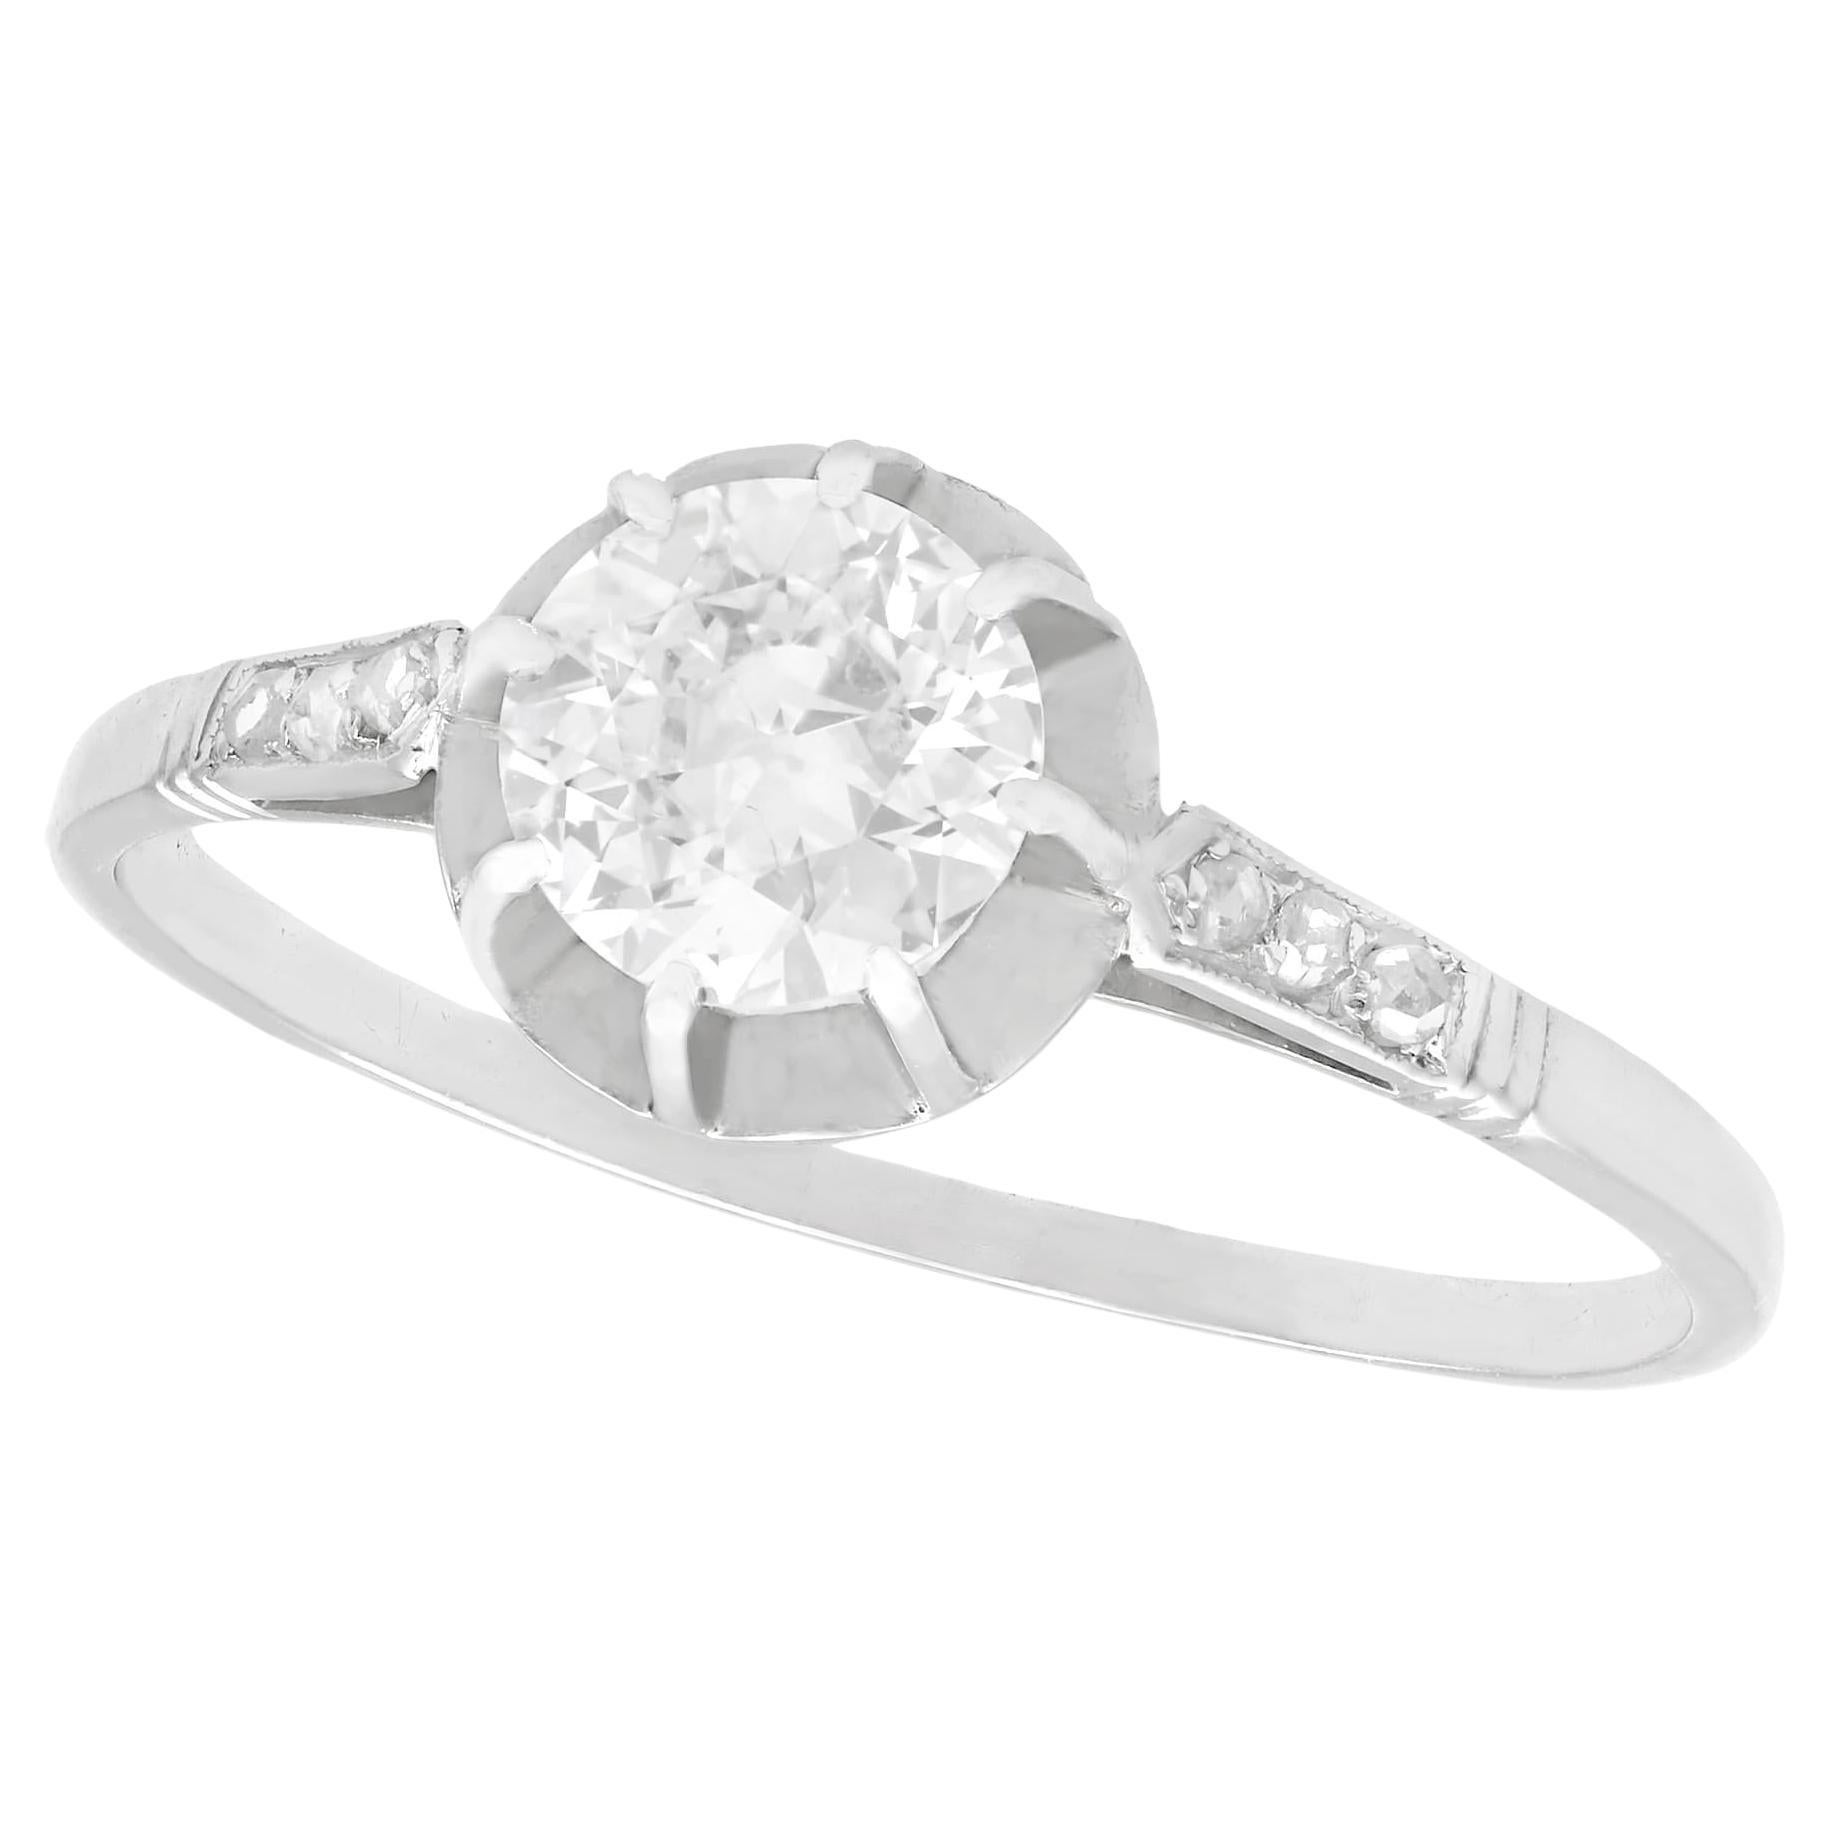 1920s Antique French Diamond and Platinum Solitaire Ring